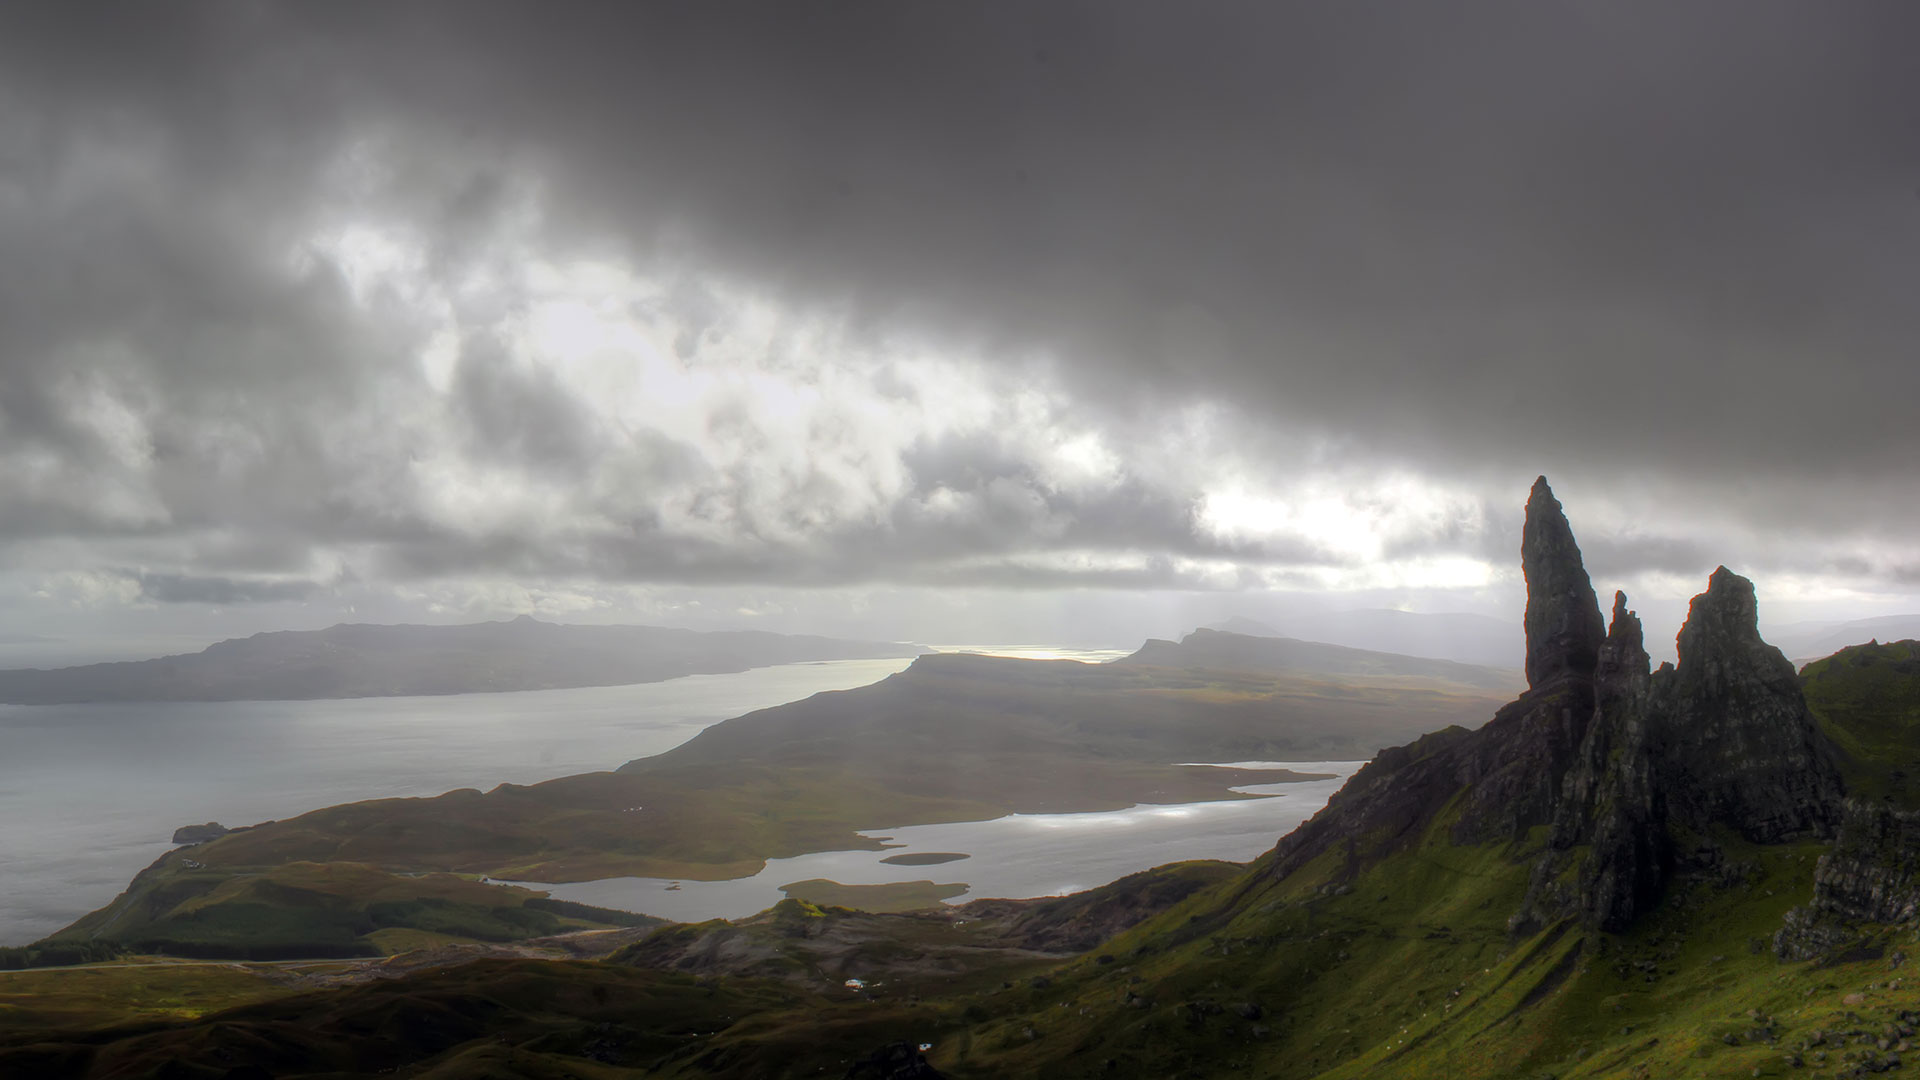 The Old man of Storr on the Isle of Skye